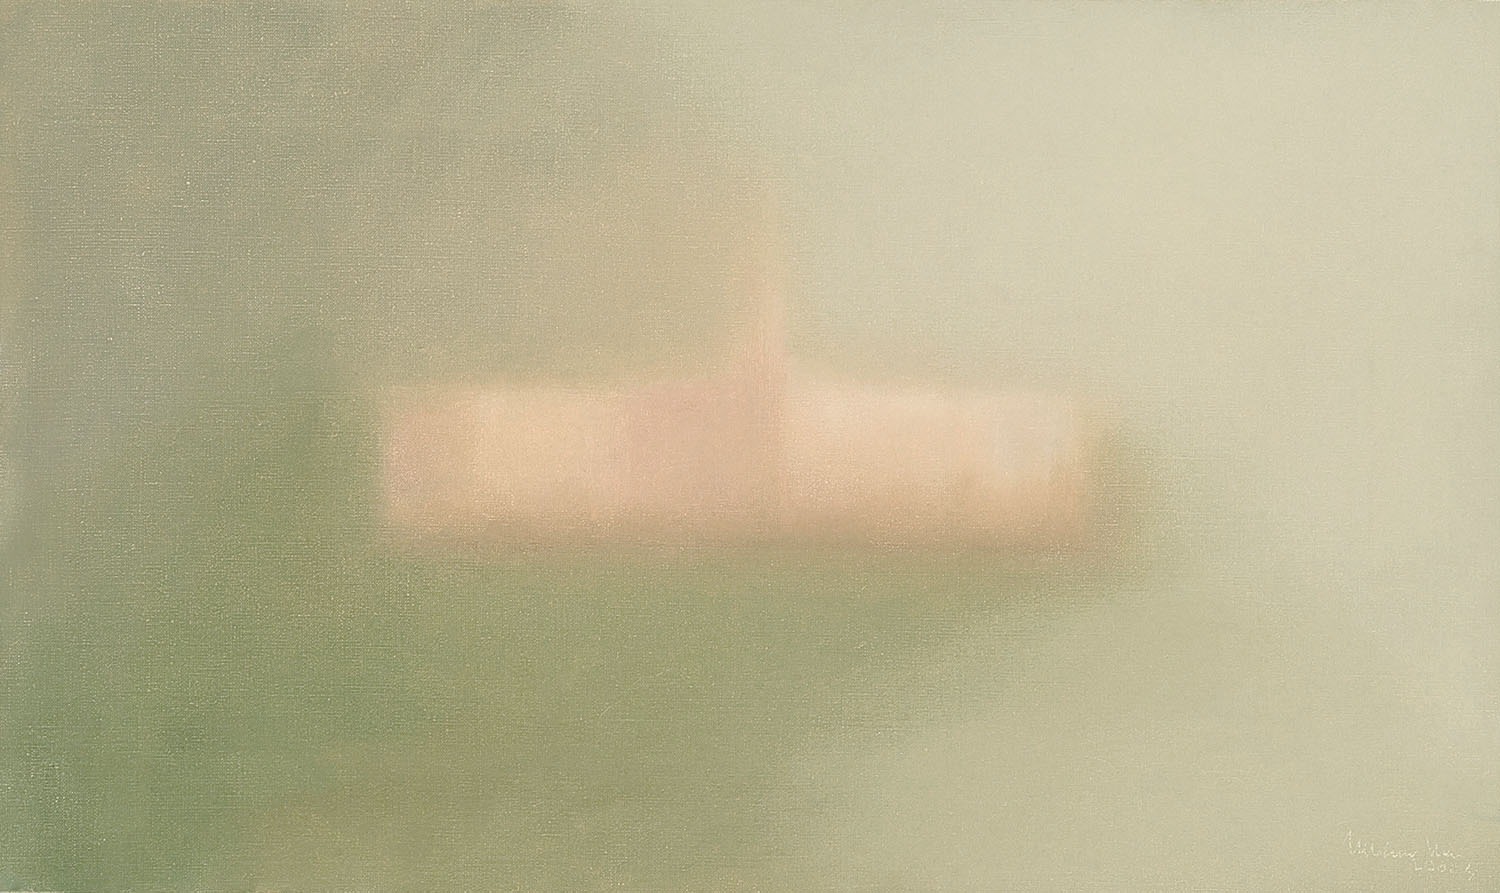 Atmosphere, 2004, oil on canvas, cm 33 x 55